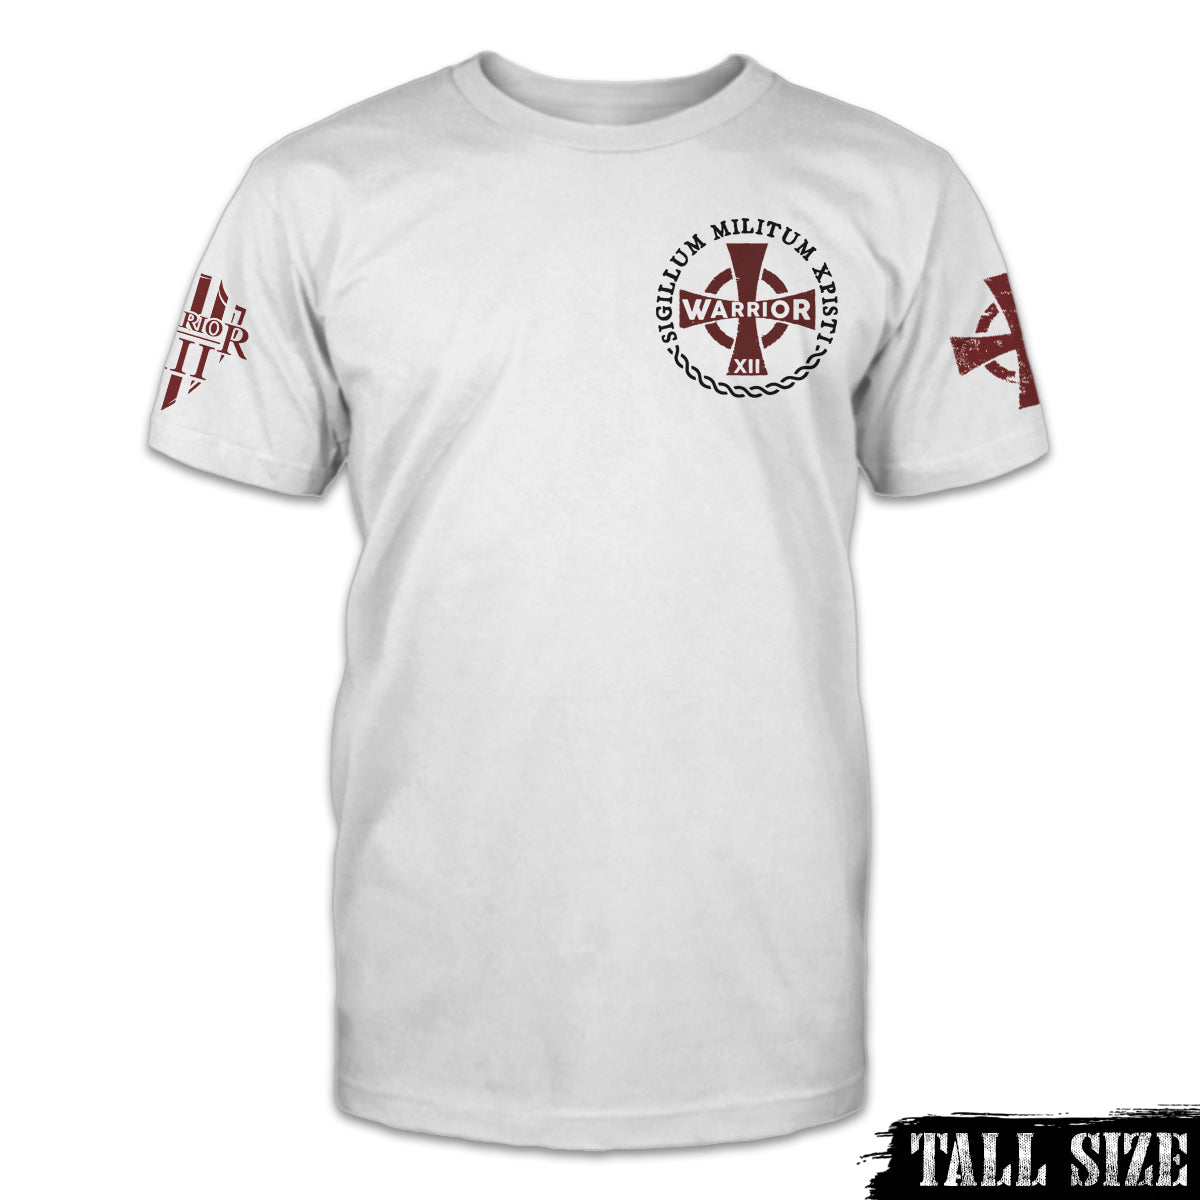 A white tall sized shirt with the cross emblem printed on the front.